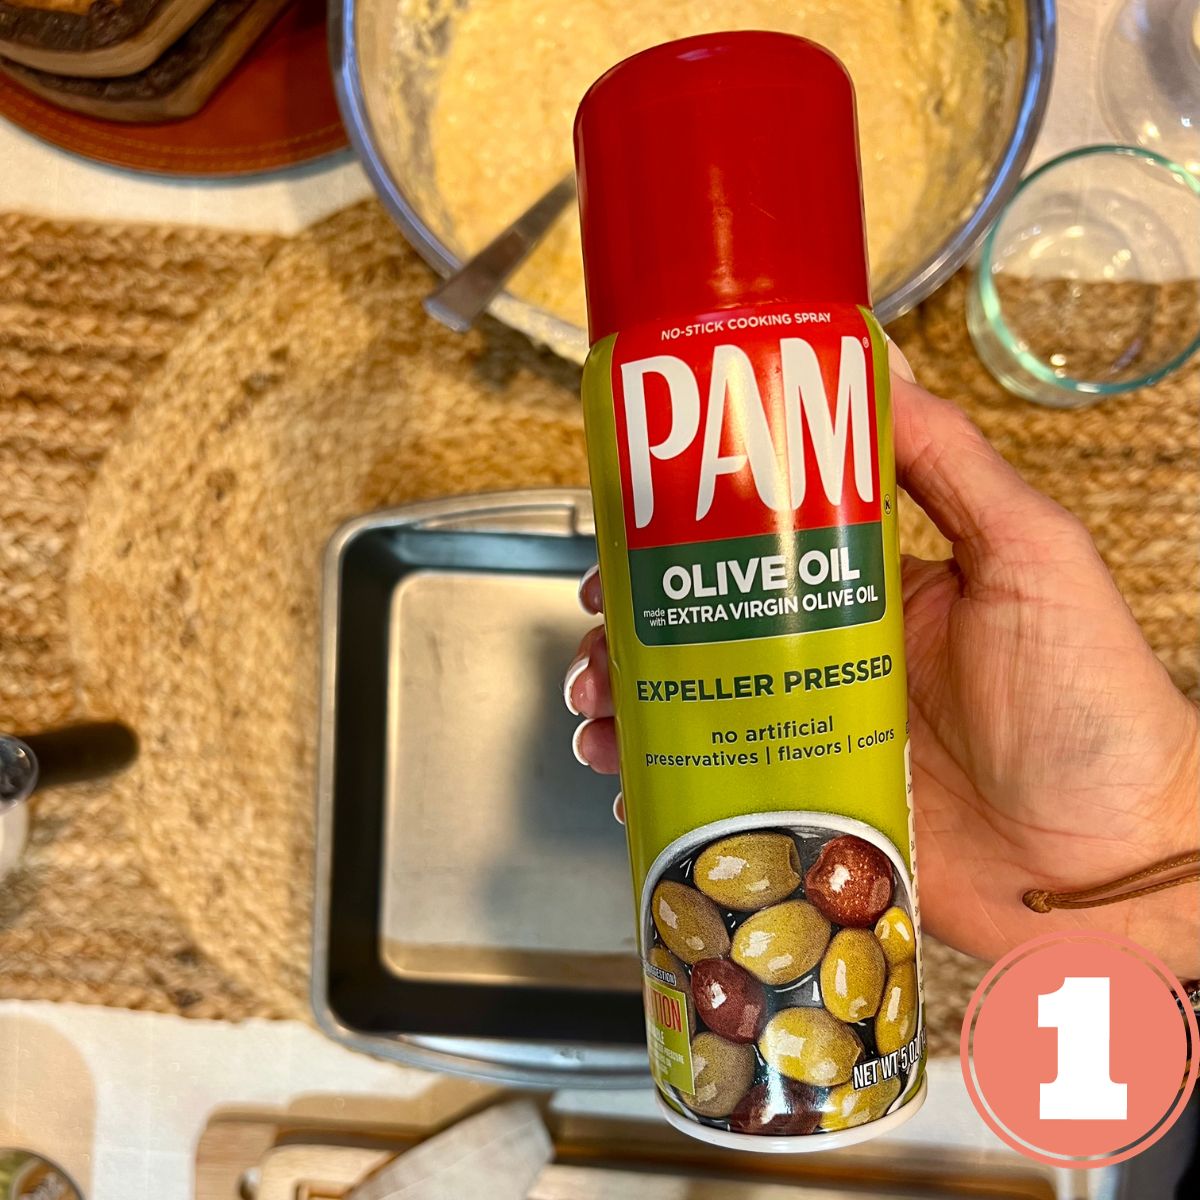 A hand holding a can of PAM spray olive oil